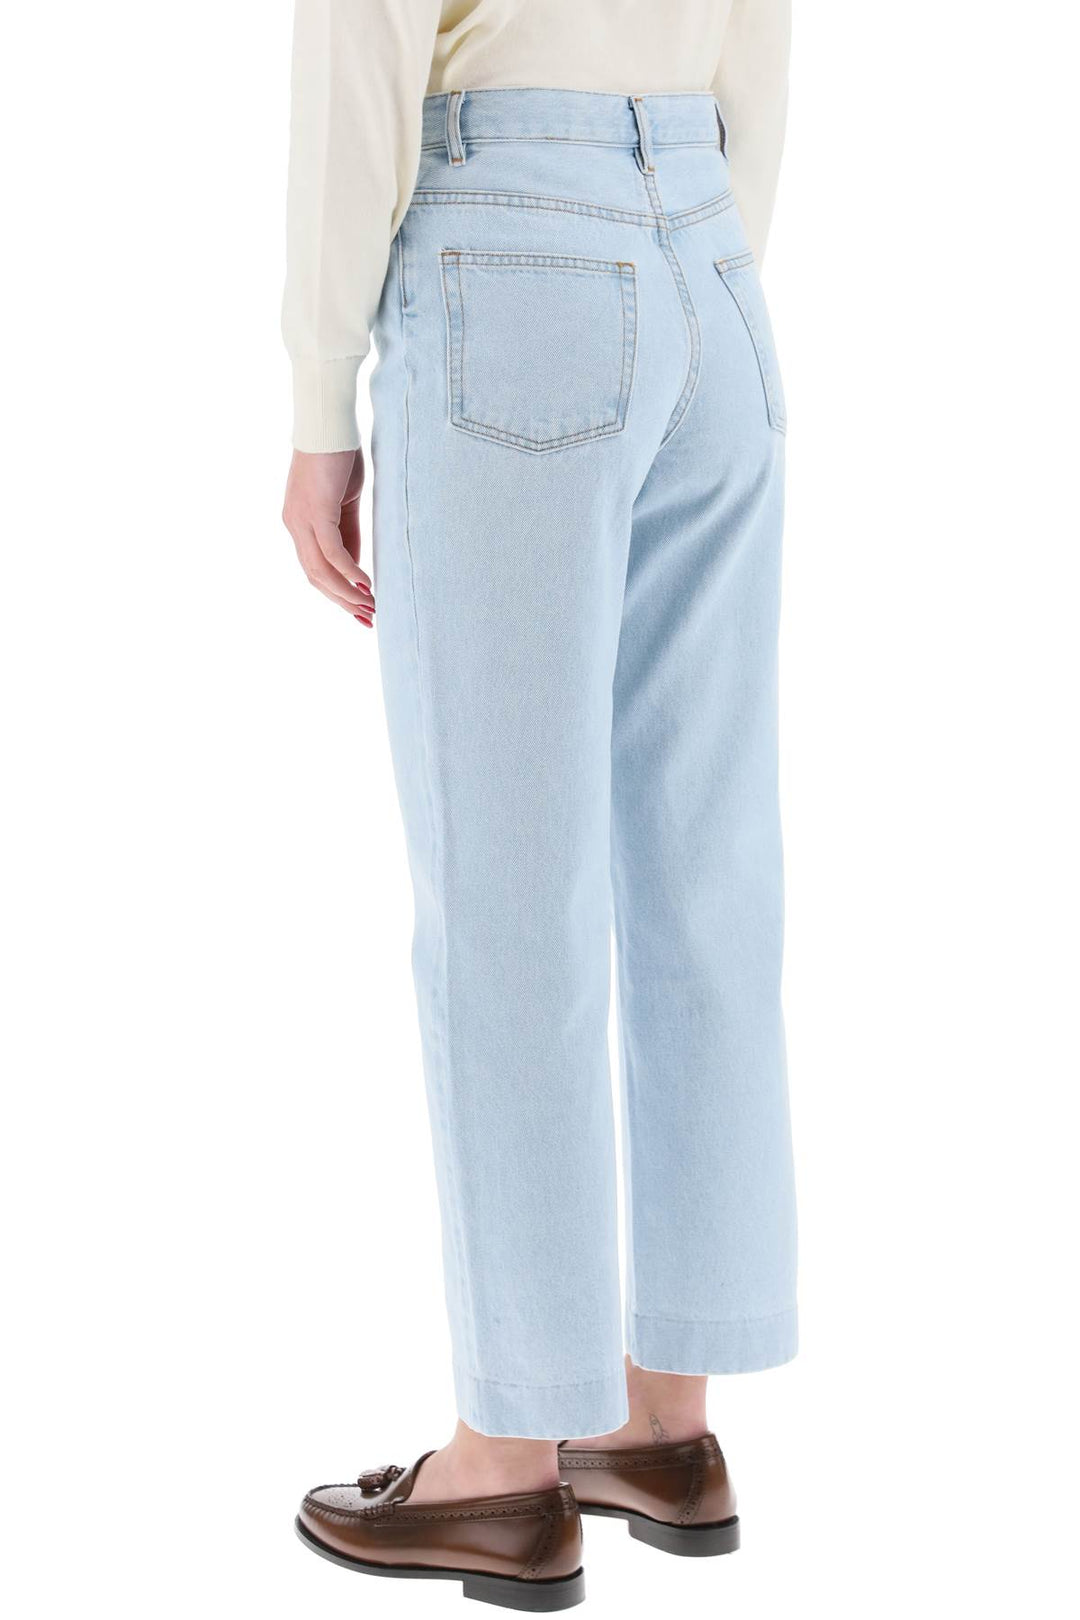 A.P.C. New Sailor Straight Cut Cropped Jeans   Light Blue